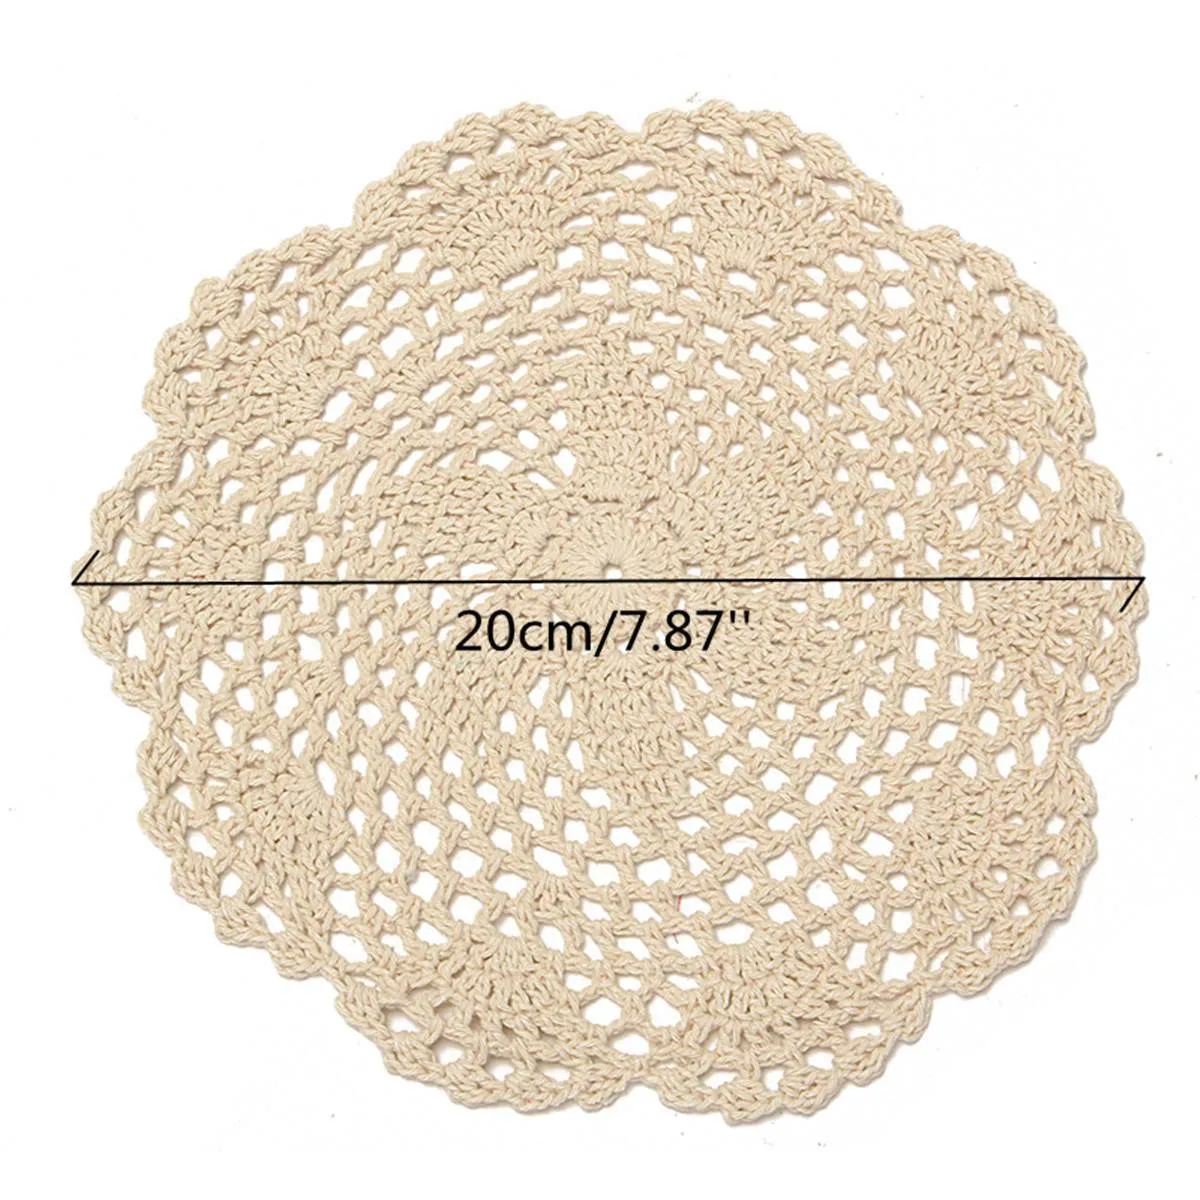 Vintage Cotton Mat Round Hand Crocheted Lace Doilies Flower Coasters Household Table Decorative Crafts Accessories T200703